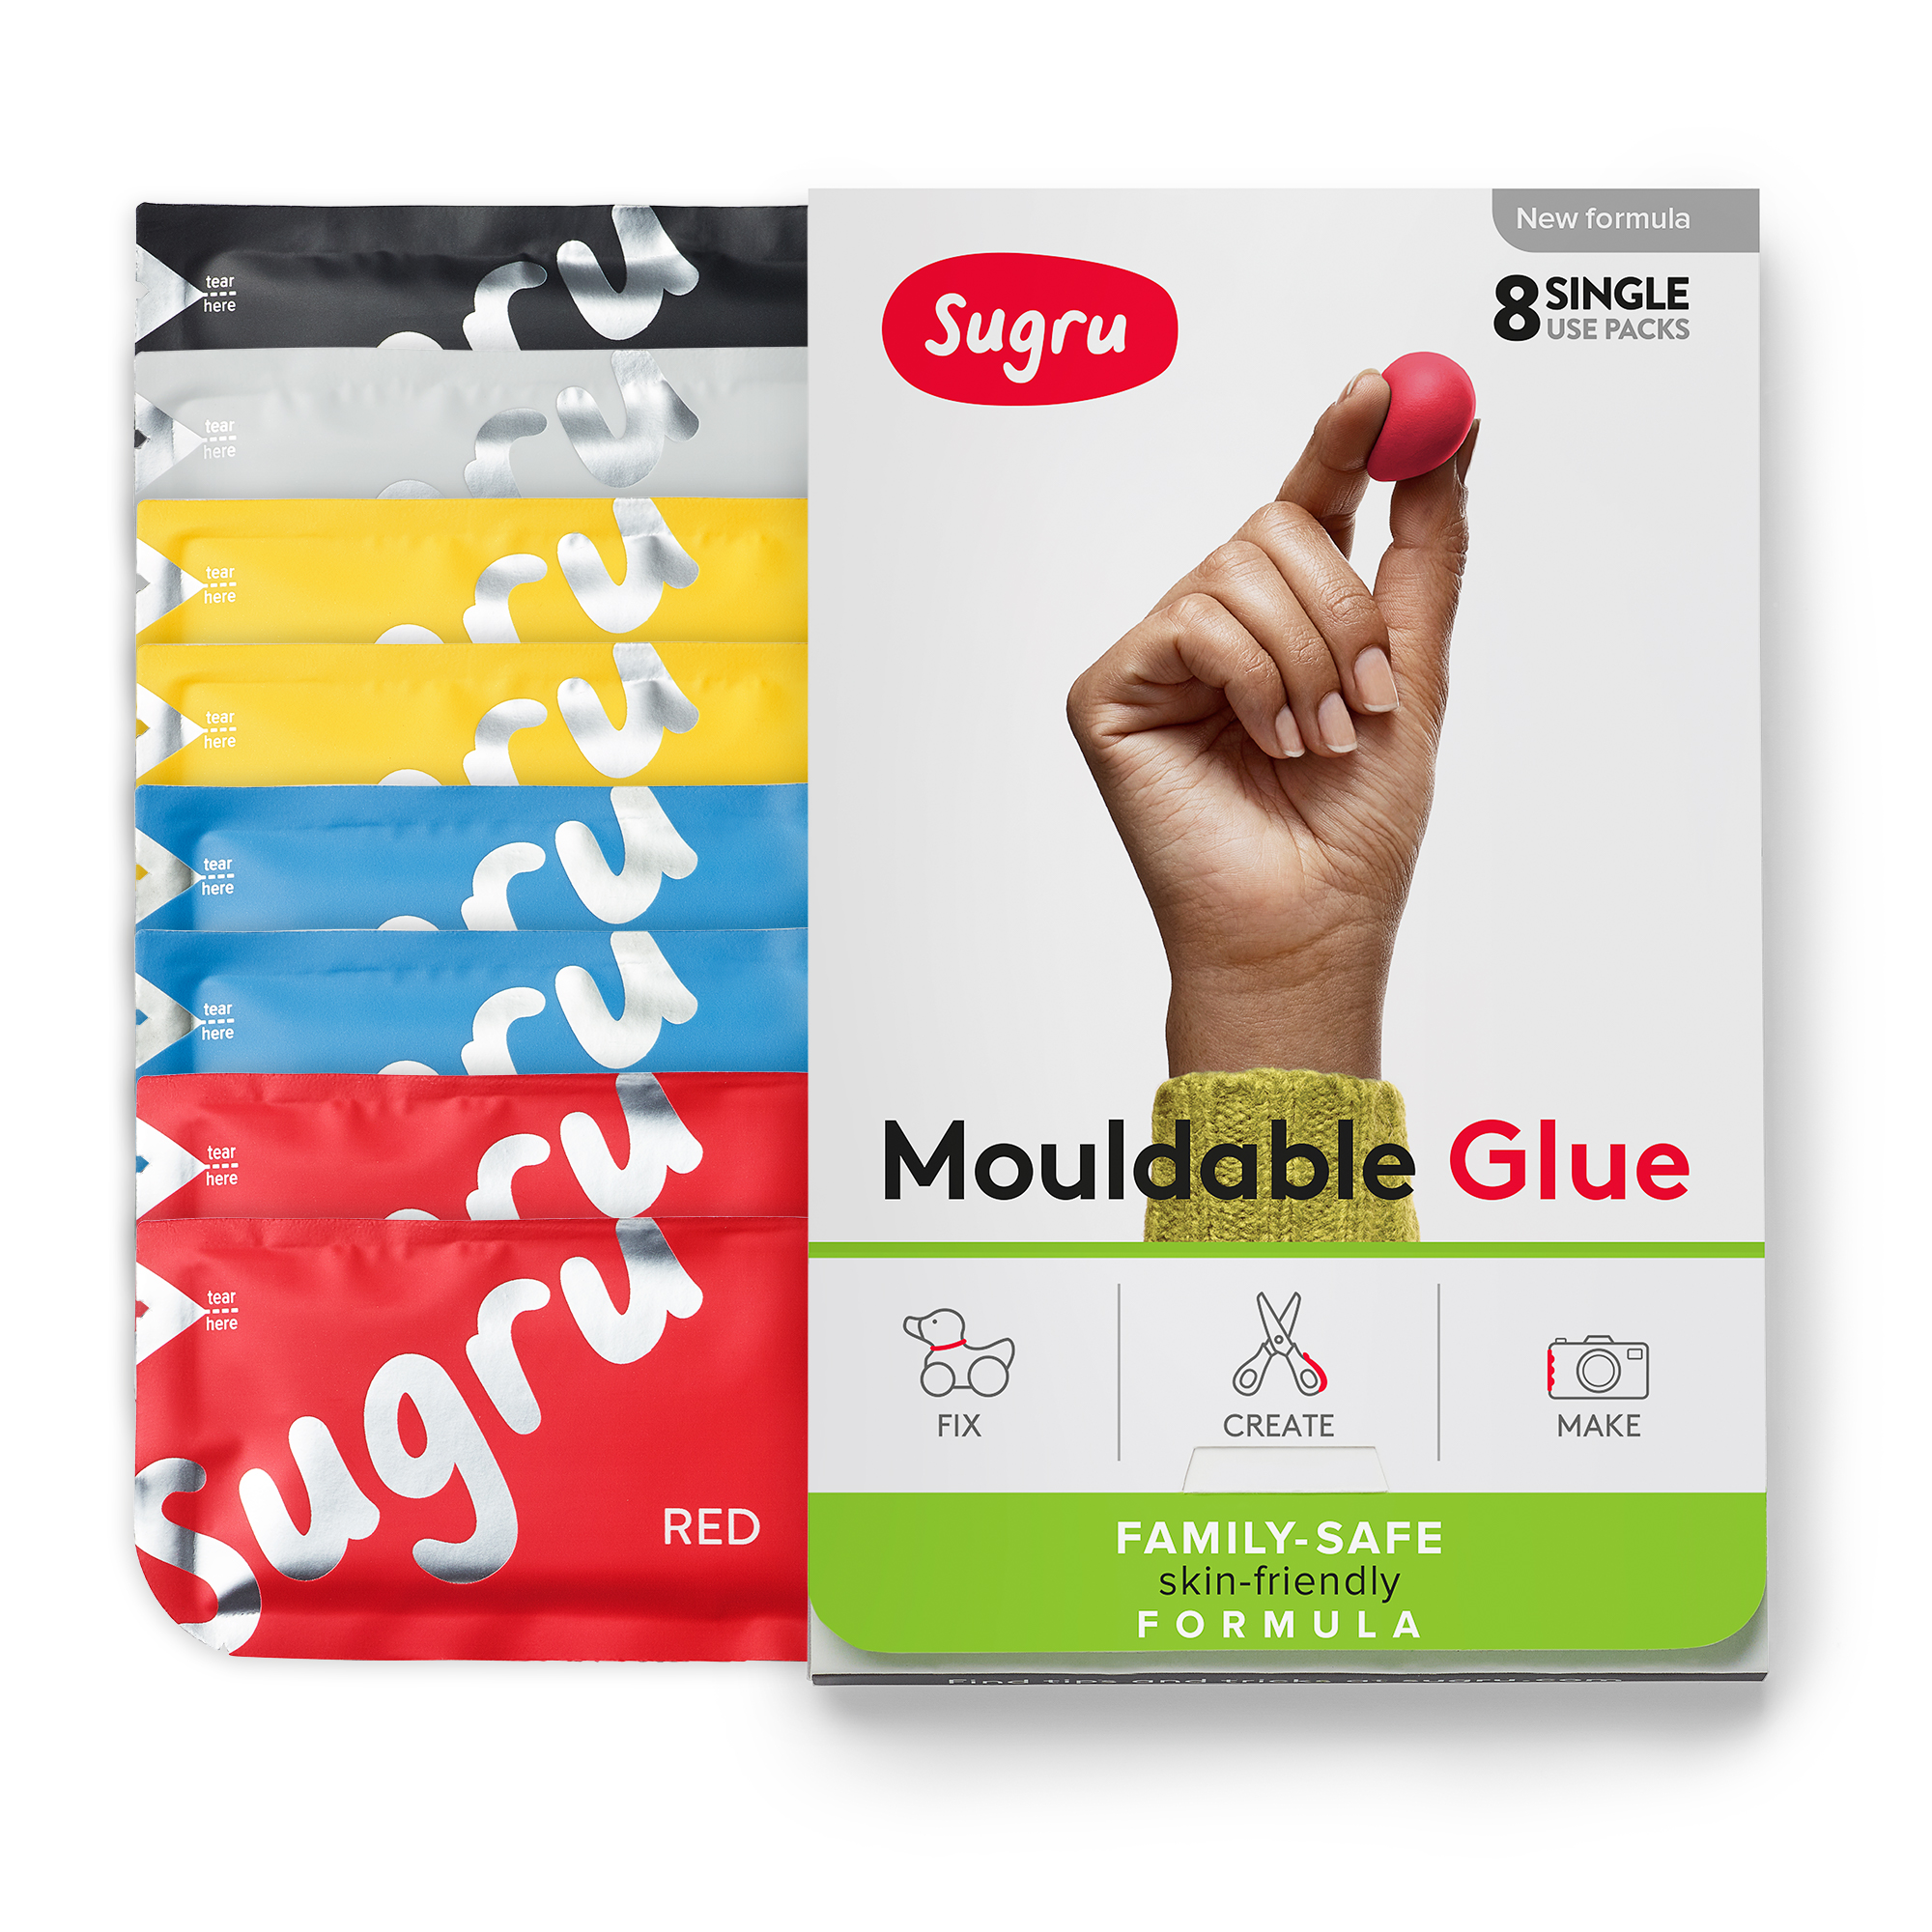 Play it Safe with a Stocking Filler Favourite - Sugru Mouldable Glue fixes  Christmas for one and all